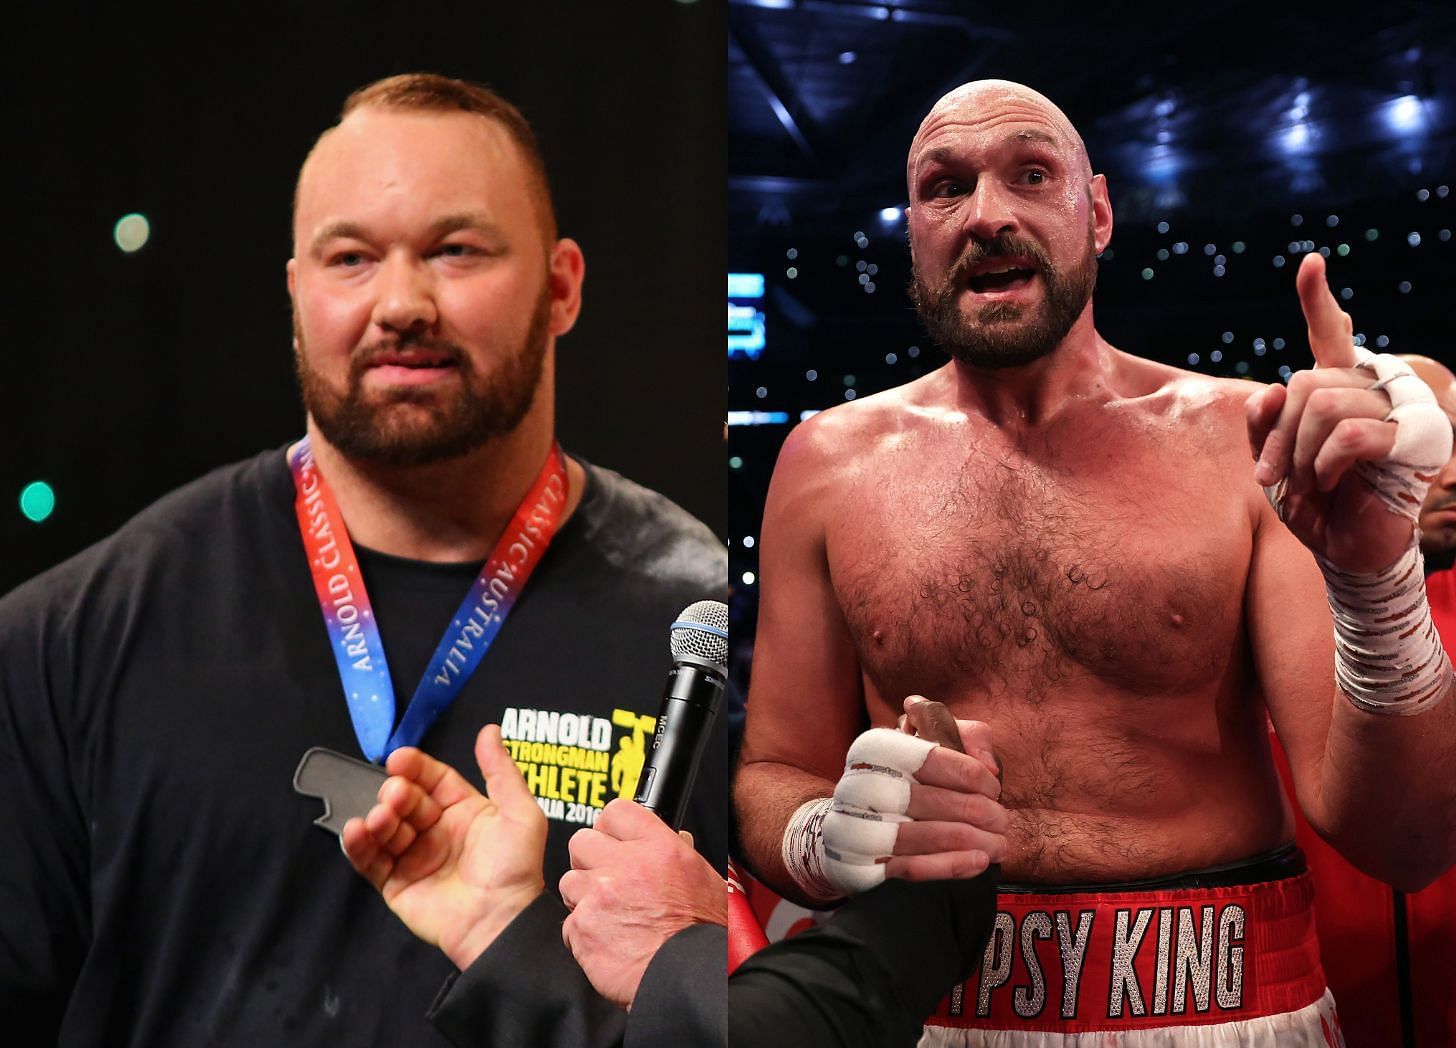 Watch Thor Bjornsson drops intense training video amidst rumors of a potential fight against Tyson Fury